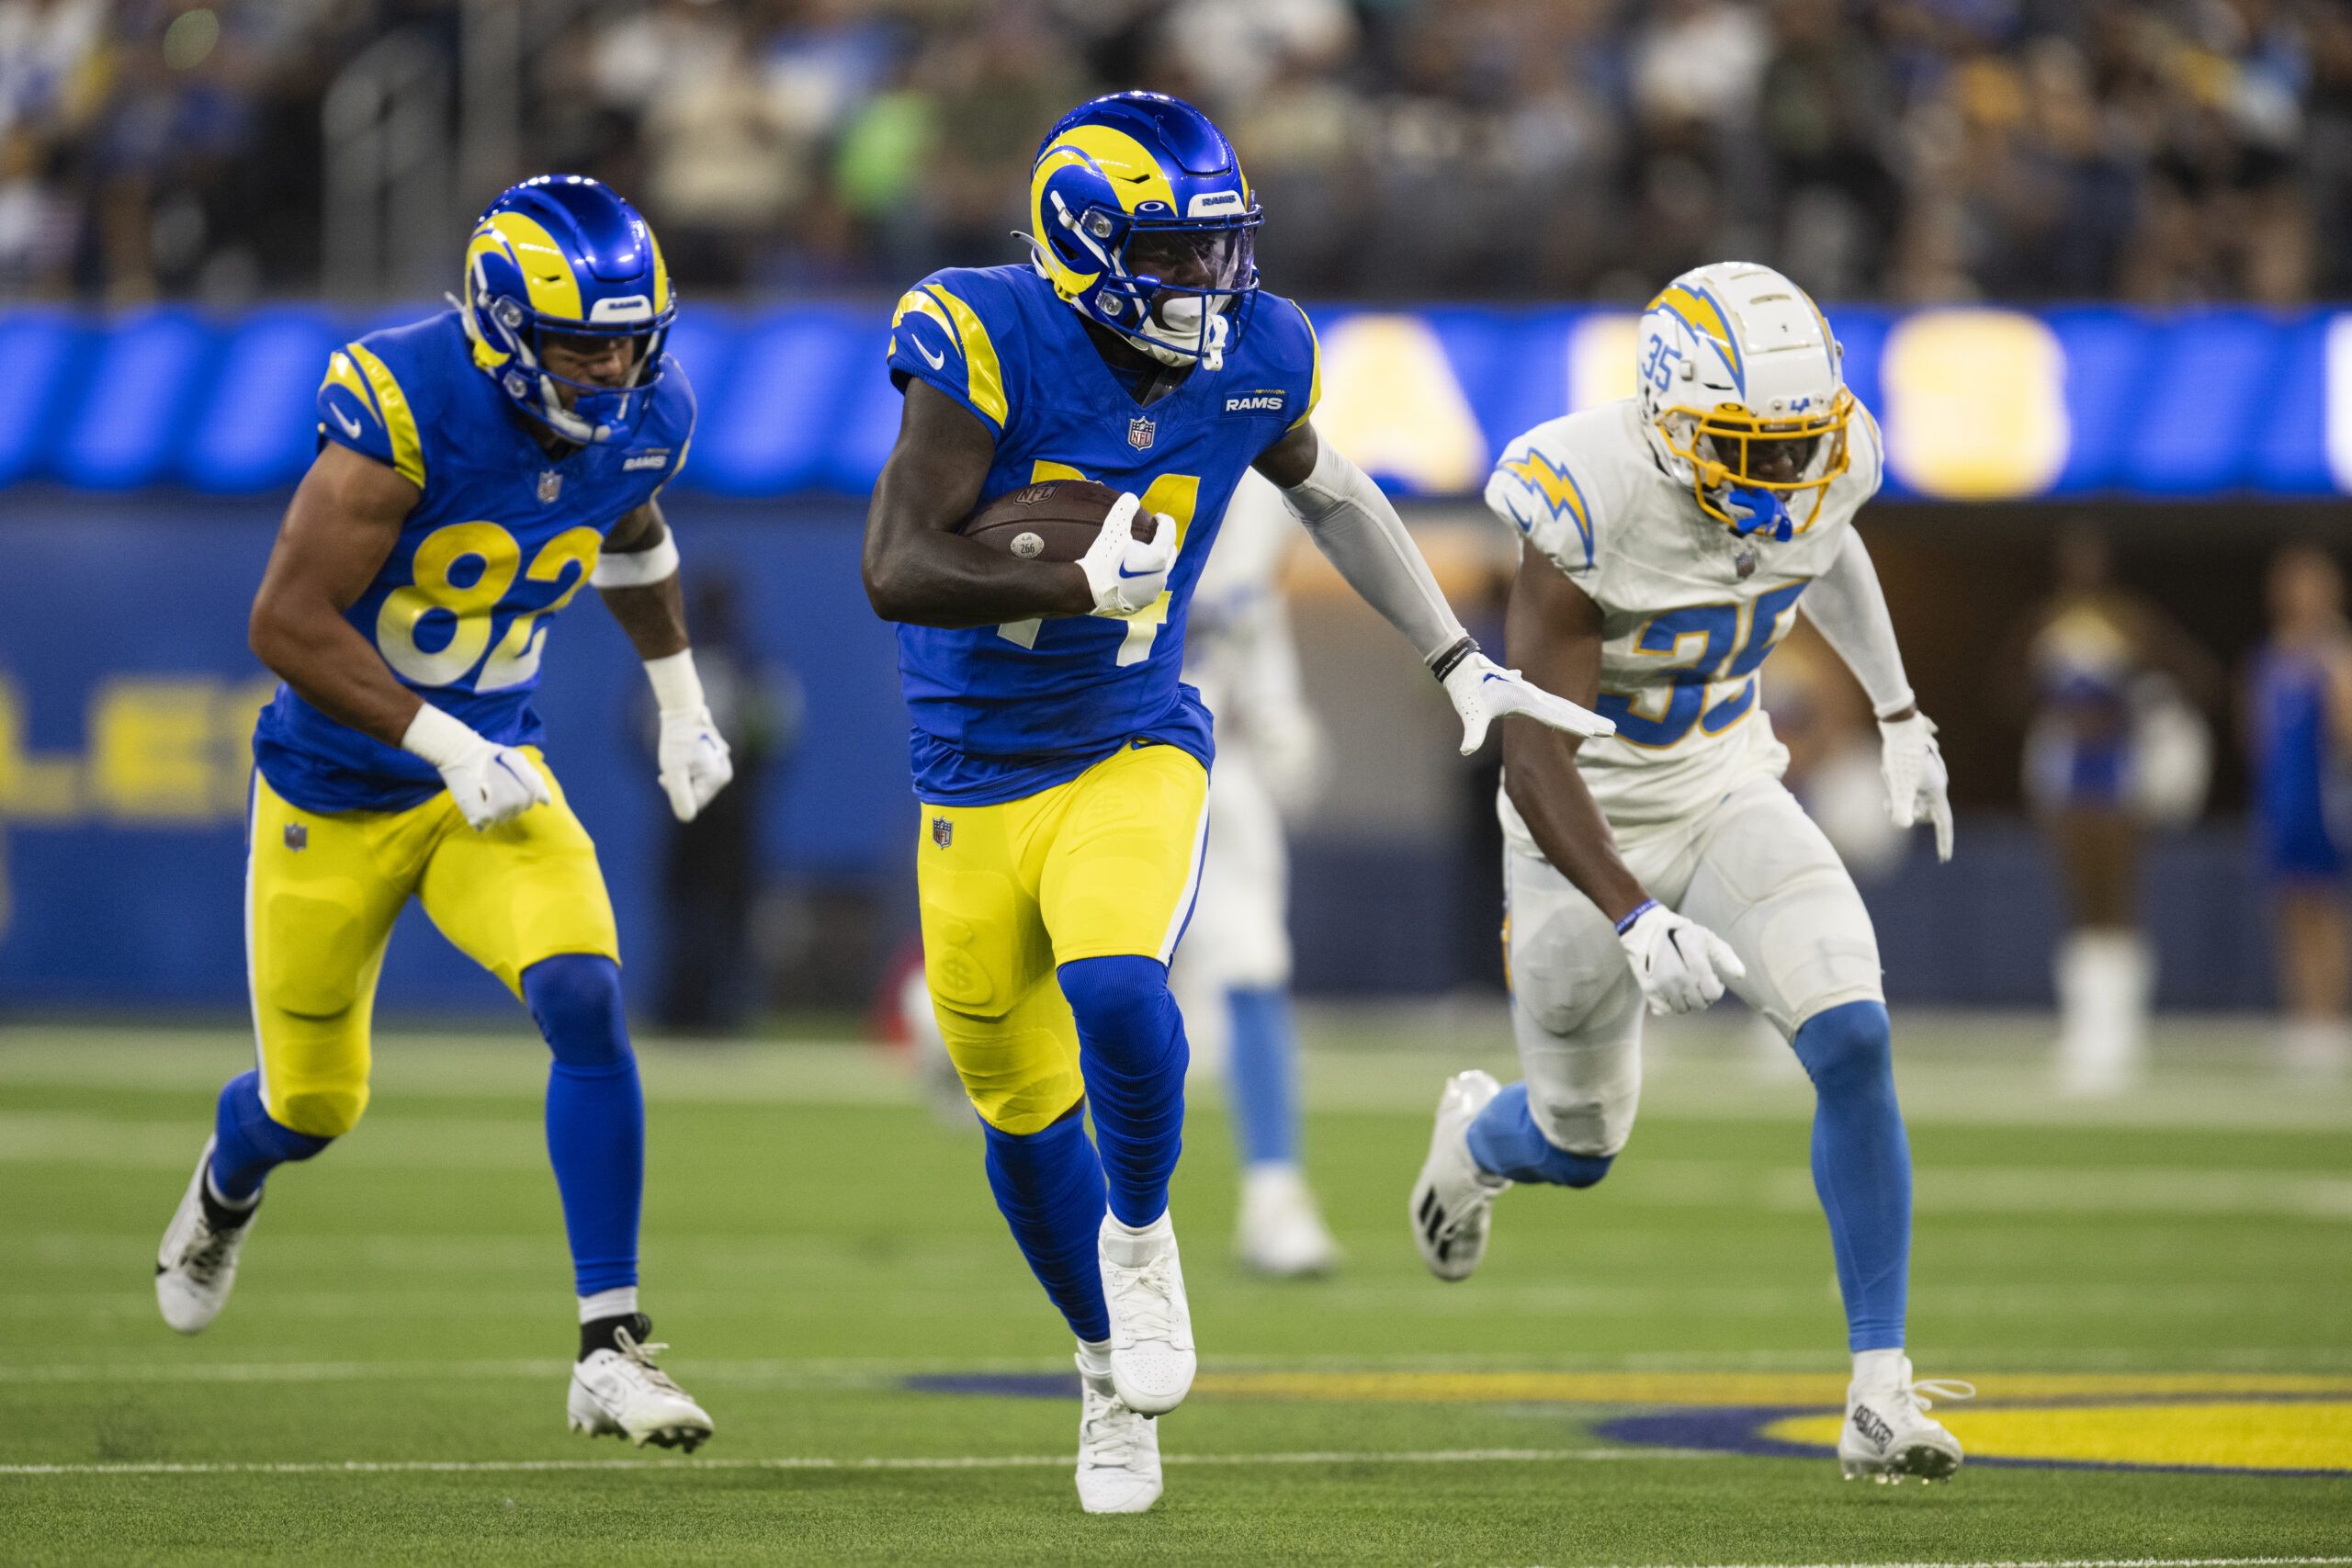 How to Watch Rams vs. Chargers preseason game